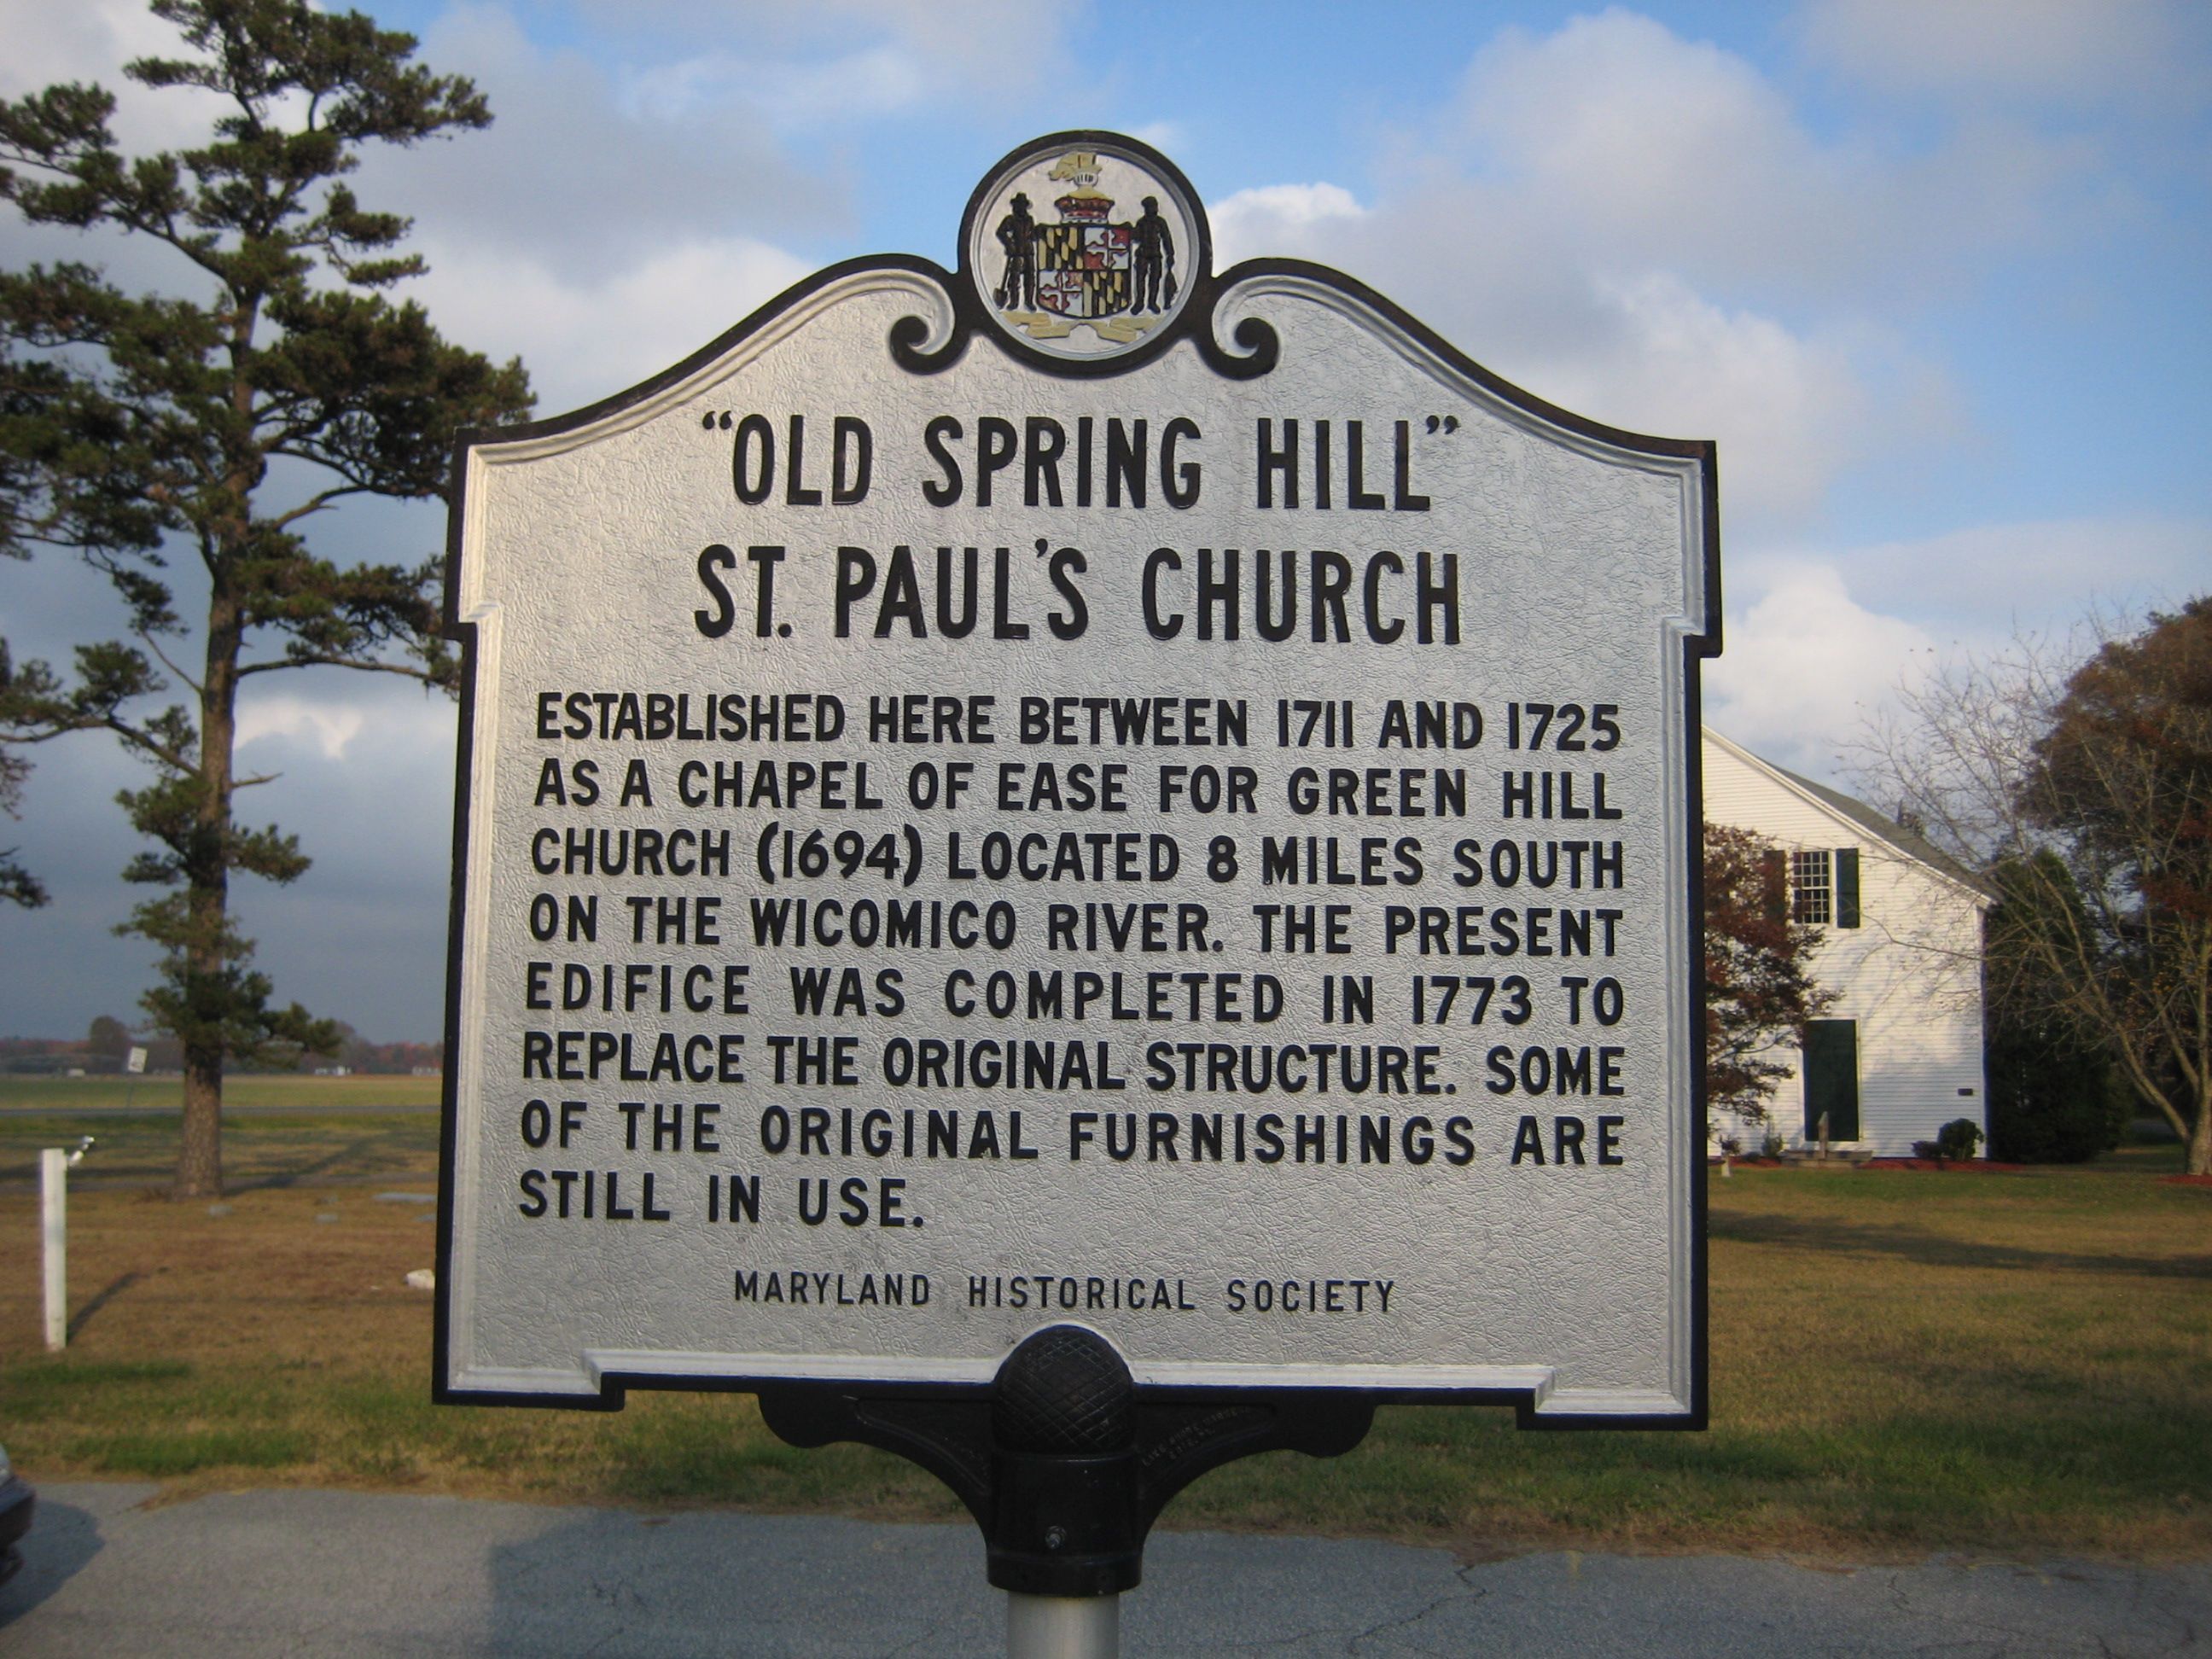 "Old Spring Hill" St. Paul